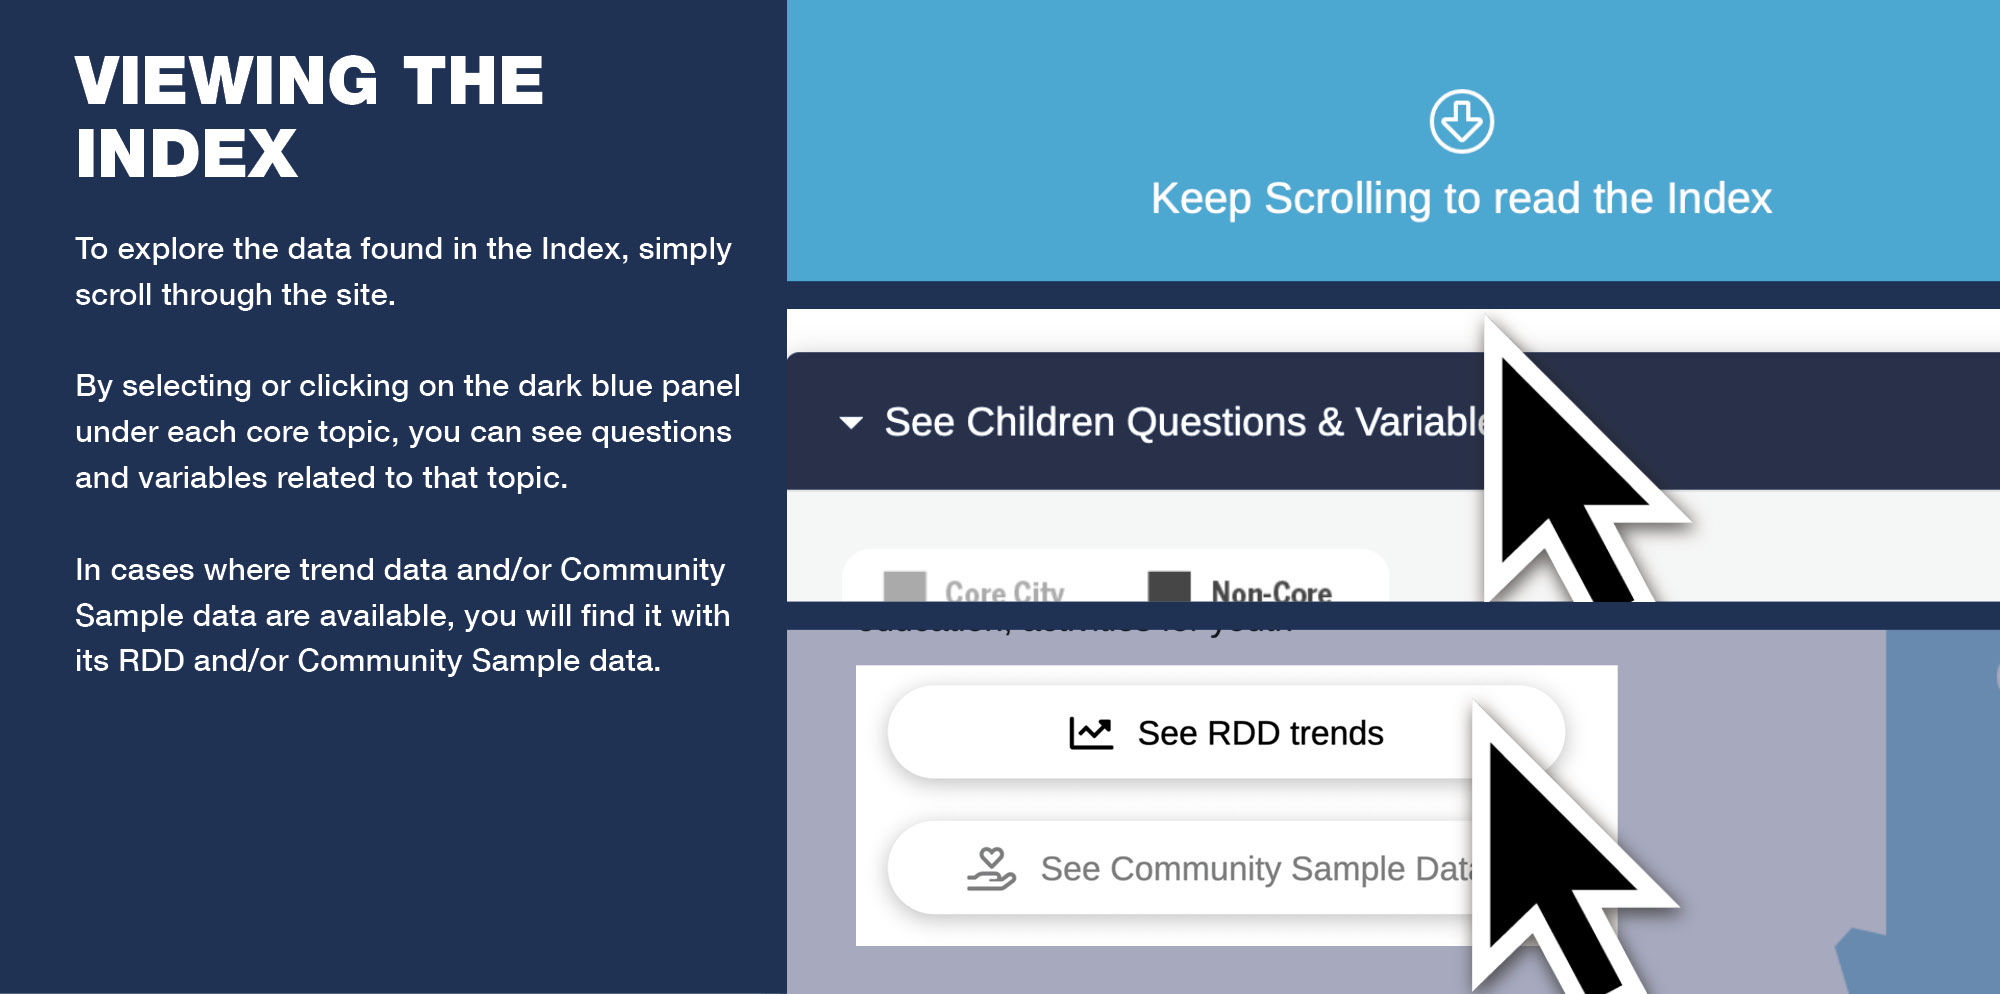 Viewing the Index: To explore the data found in the Index, simply scroll through the site. By selecting or clicking on the dark blue panel under each core topic, you can see questions and variable related to that topic. In cases where trend data and/or Community Sample data are available, you will find it with its RDD and/or Community Sample data.